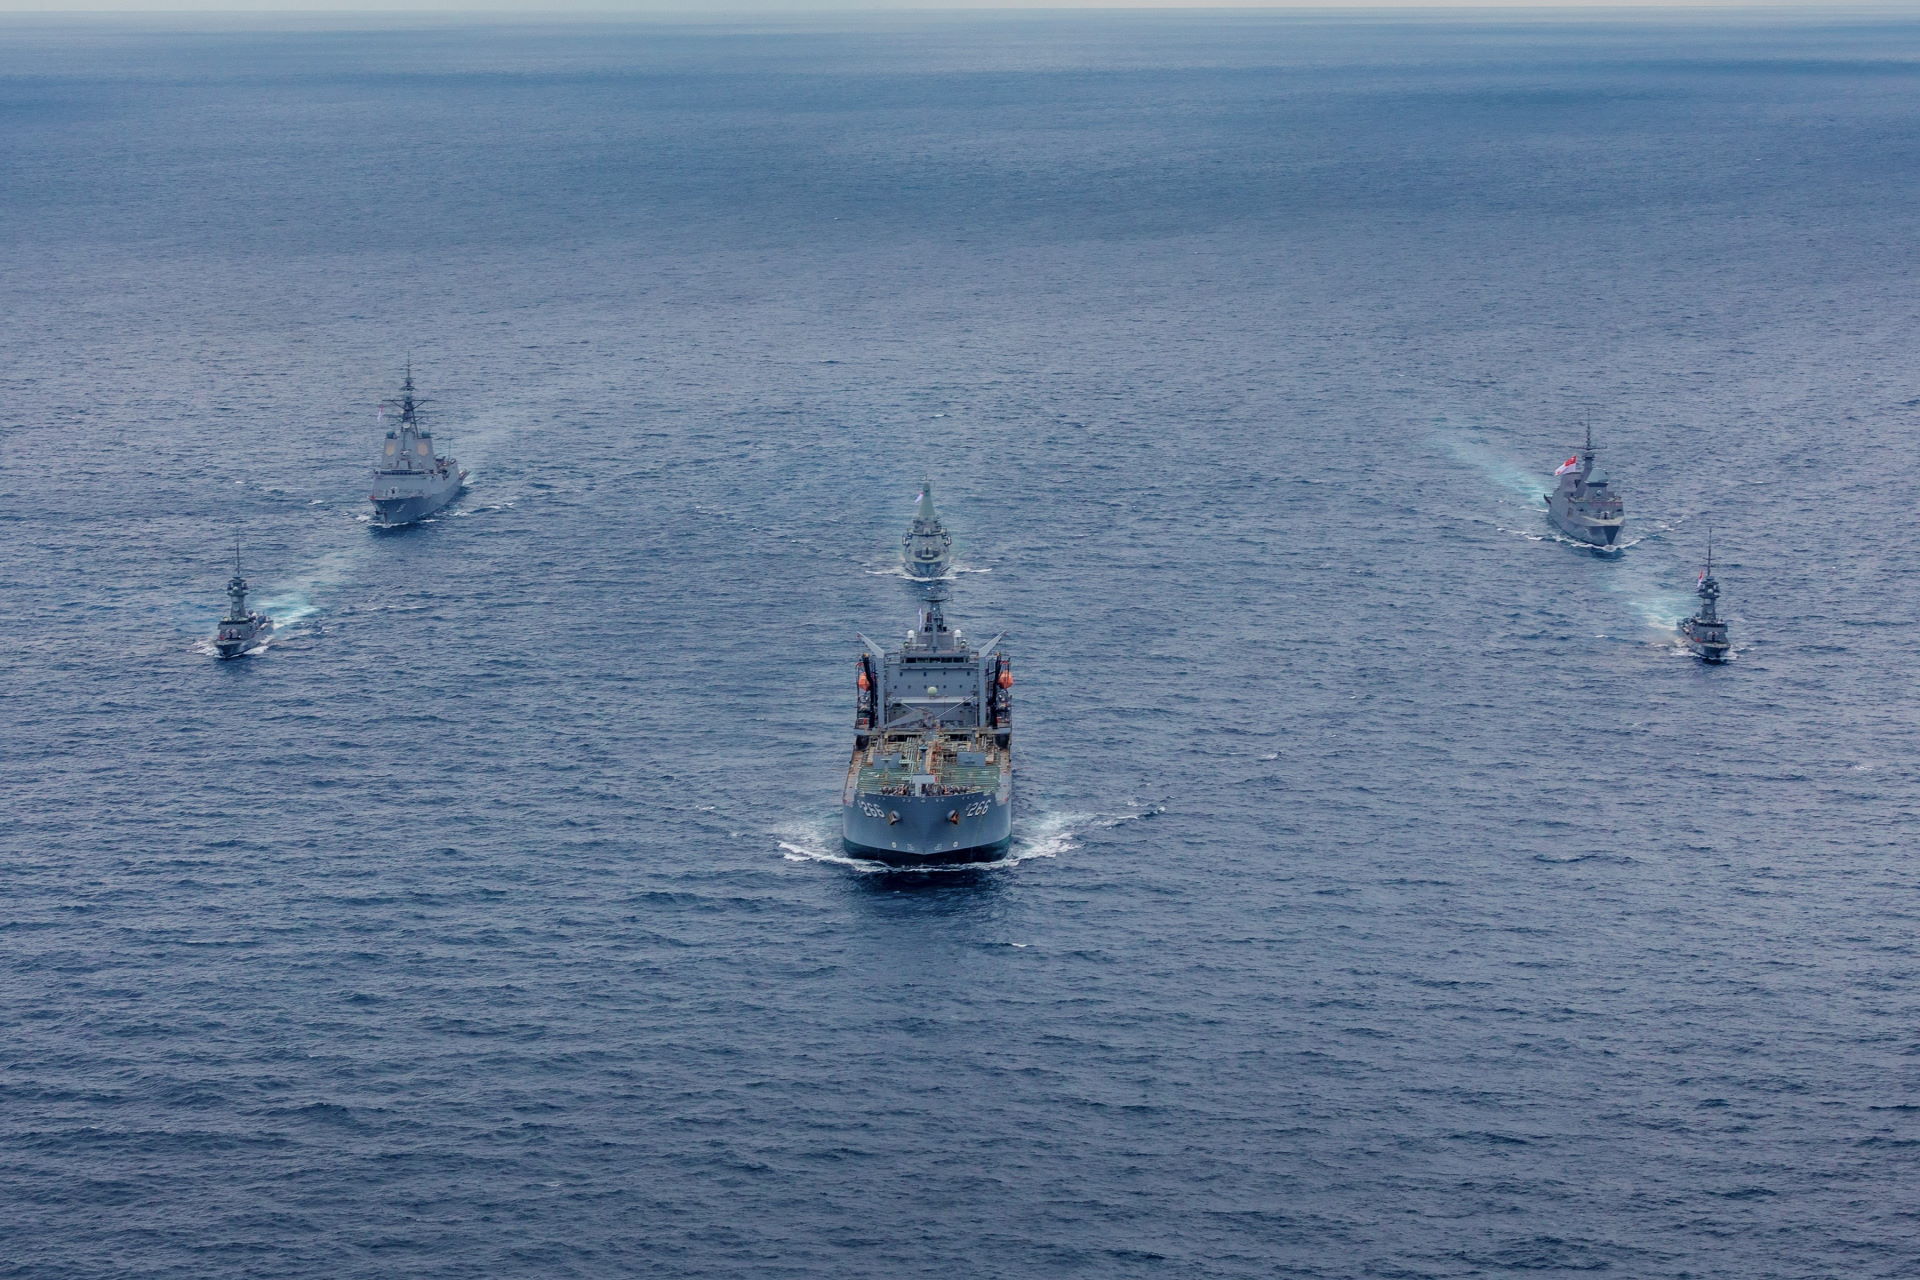 The RSN and RAN ships sailing in formation during the exercise, with the RSN's missile corvettes RSS Valour (left), RSS Valiant (right), frigate RSS Tenacious (right row, back) and littoral mission vessel RSS Dauntless (middle row, back). (Photo Courtesy: RAN).